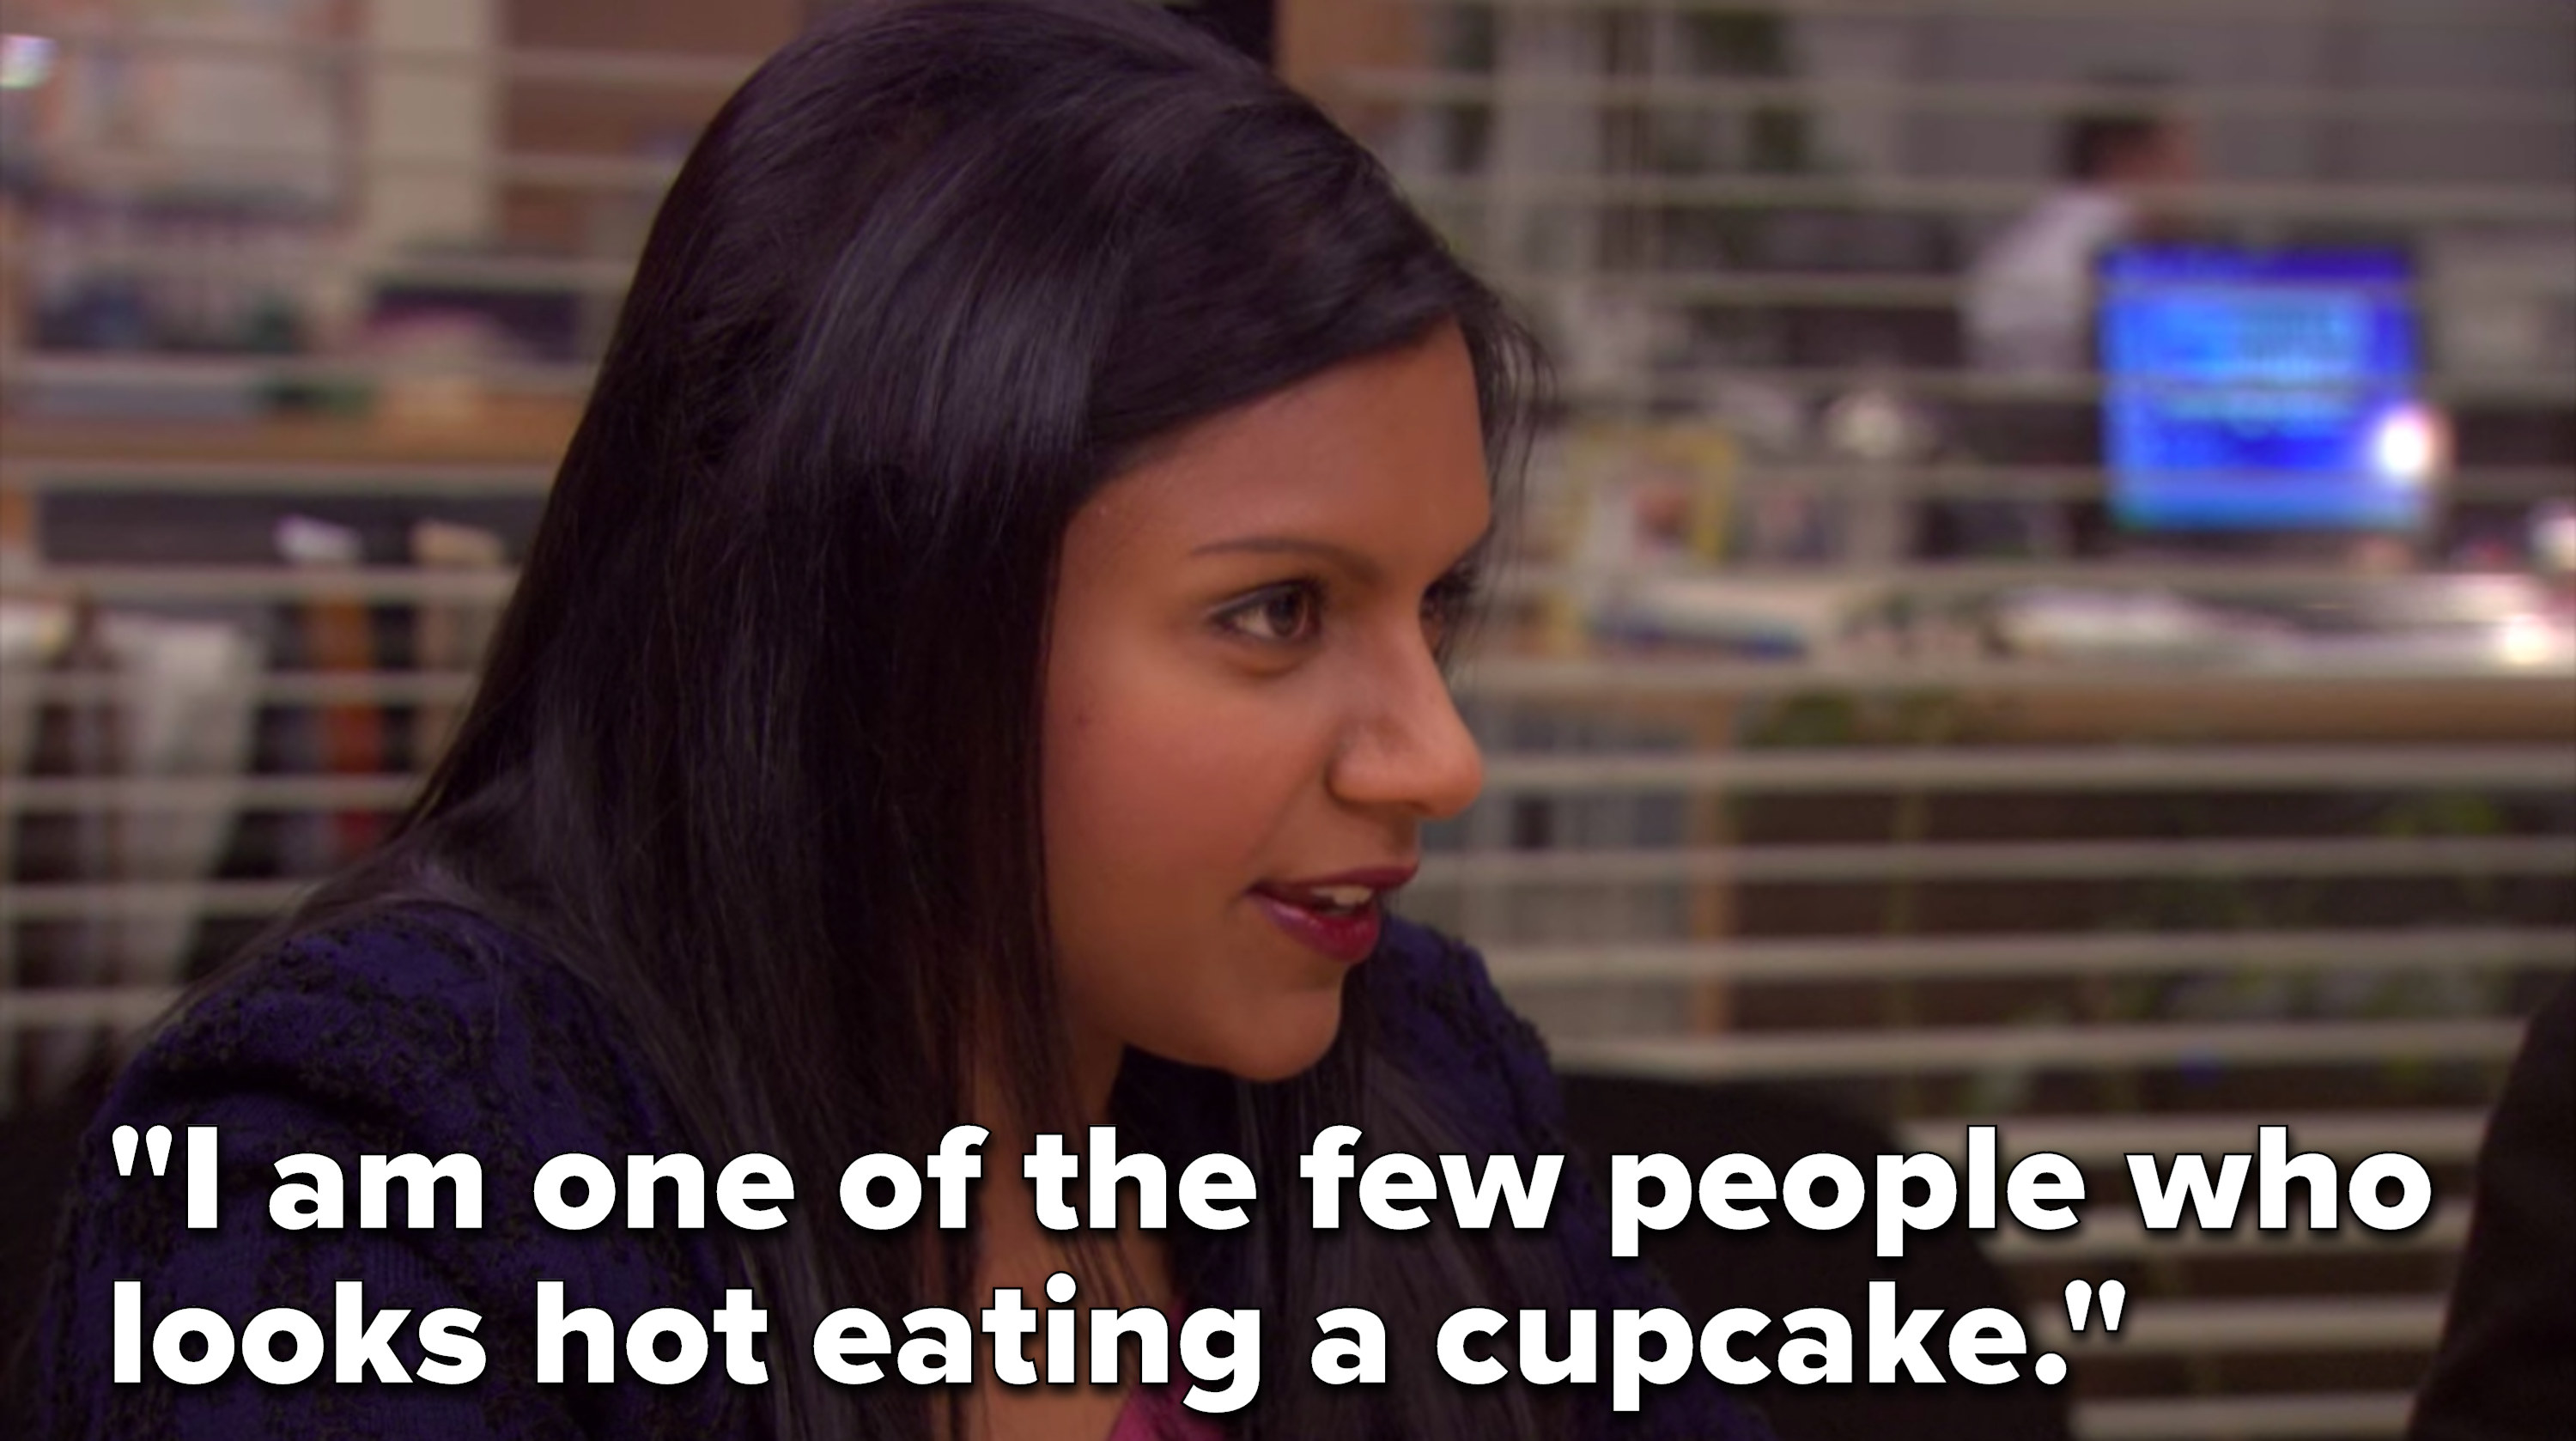 Kelly says, “I am one of the few people who looks hot eating a cupcake&quot;